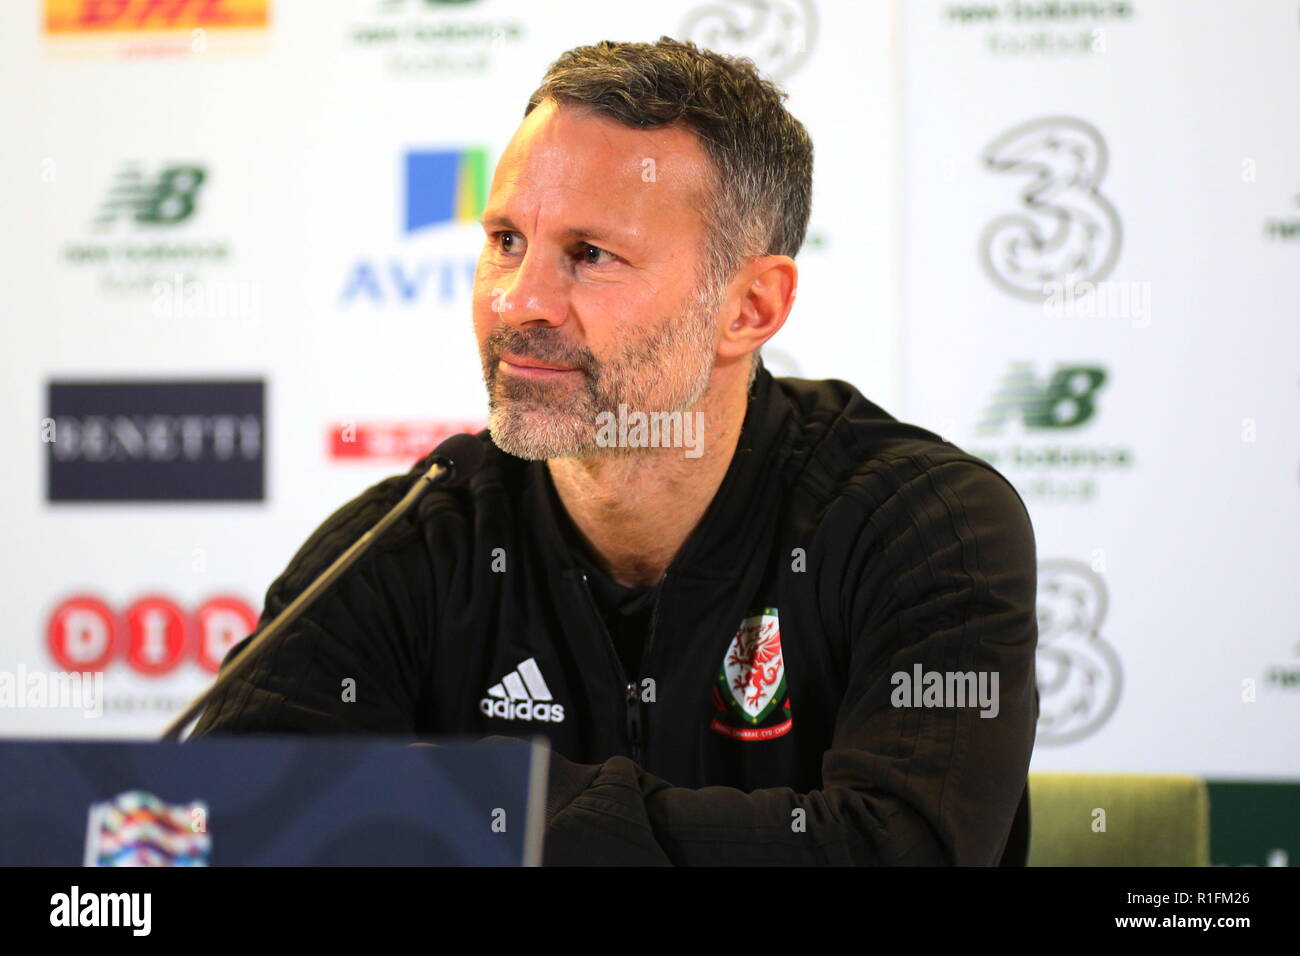 Dublin, Republic of Ireland. 16th October 2018. Wales Manager, Ryan Giggs post match interview. Republic of Ireland v Wales – UEFA Nations League – League B – Group 4 Stock Photo